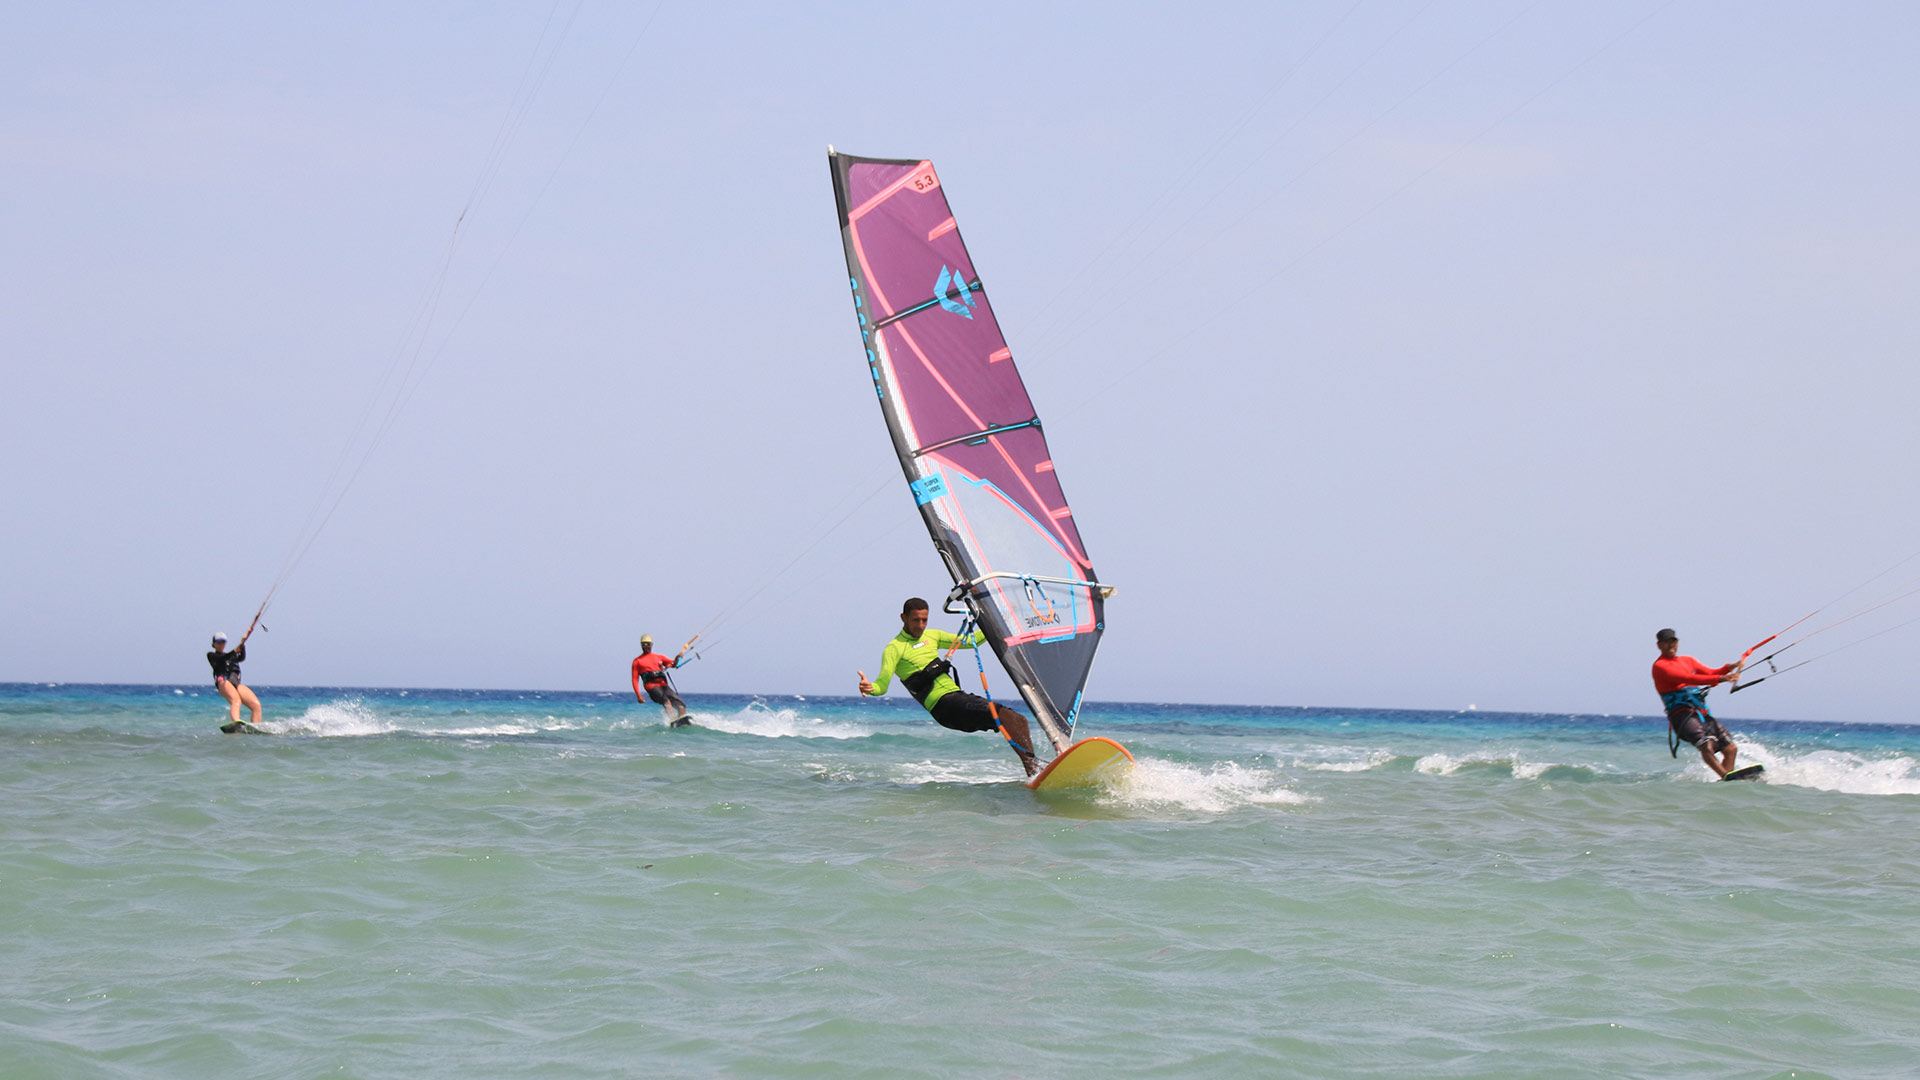 team members of Ion Club Safaga are riding toguether with kitesurf material and windsurf as well on the spot of Safaga